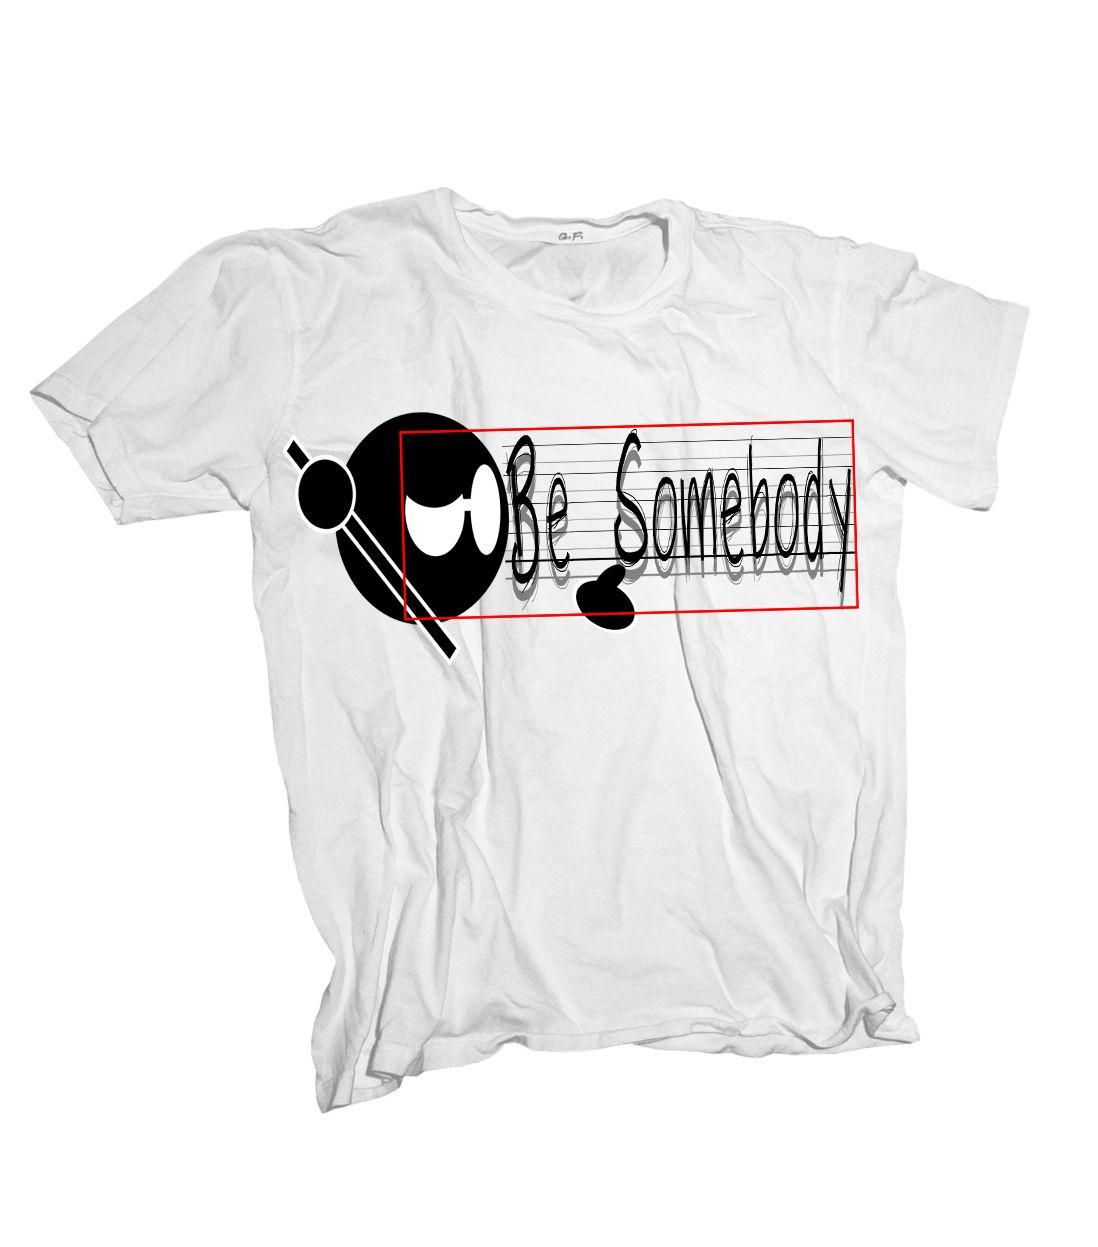 Cool T Logo - The Be Somebody Classic T Shirt By Mahweh Clothing. Logo T Shirts